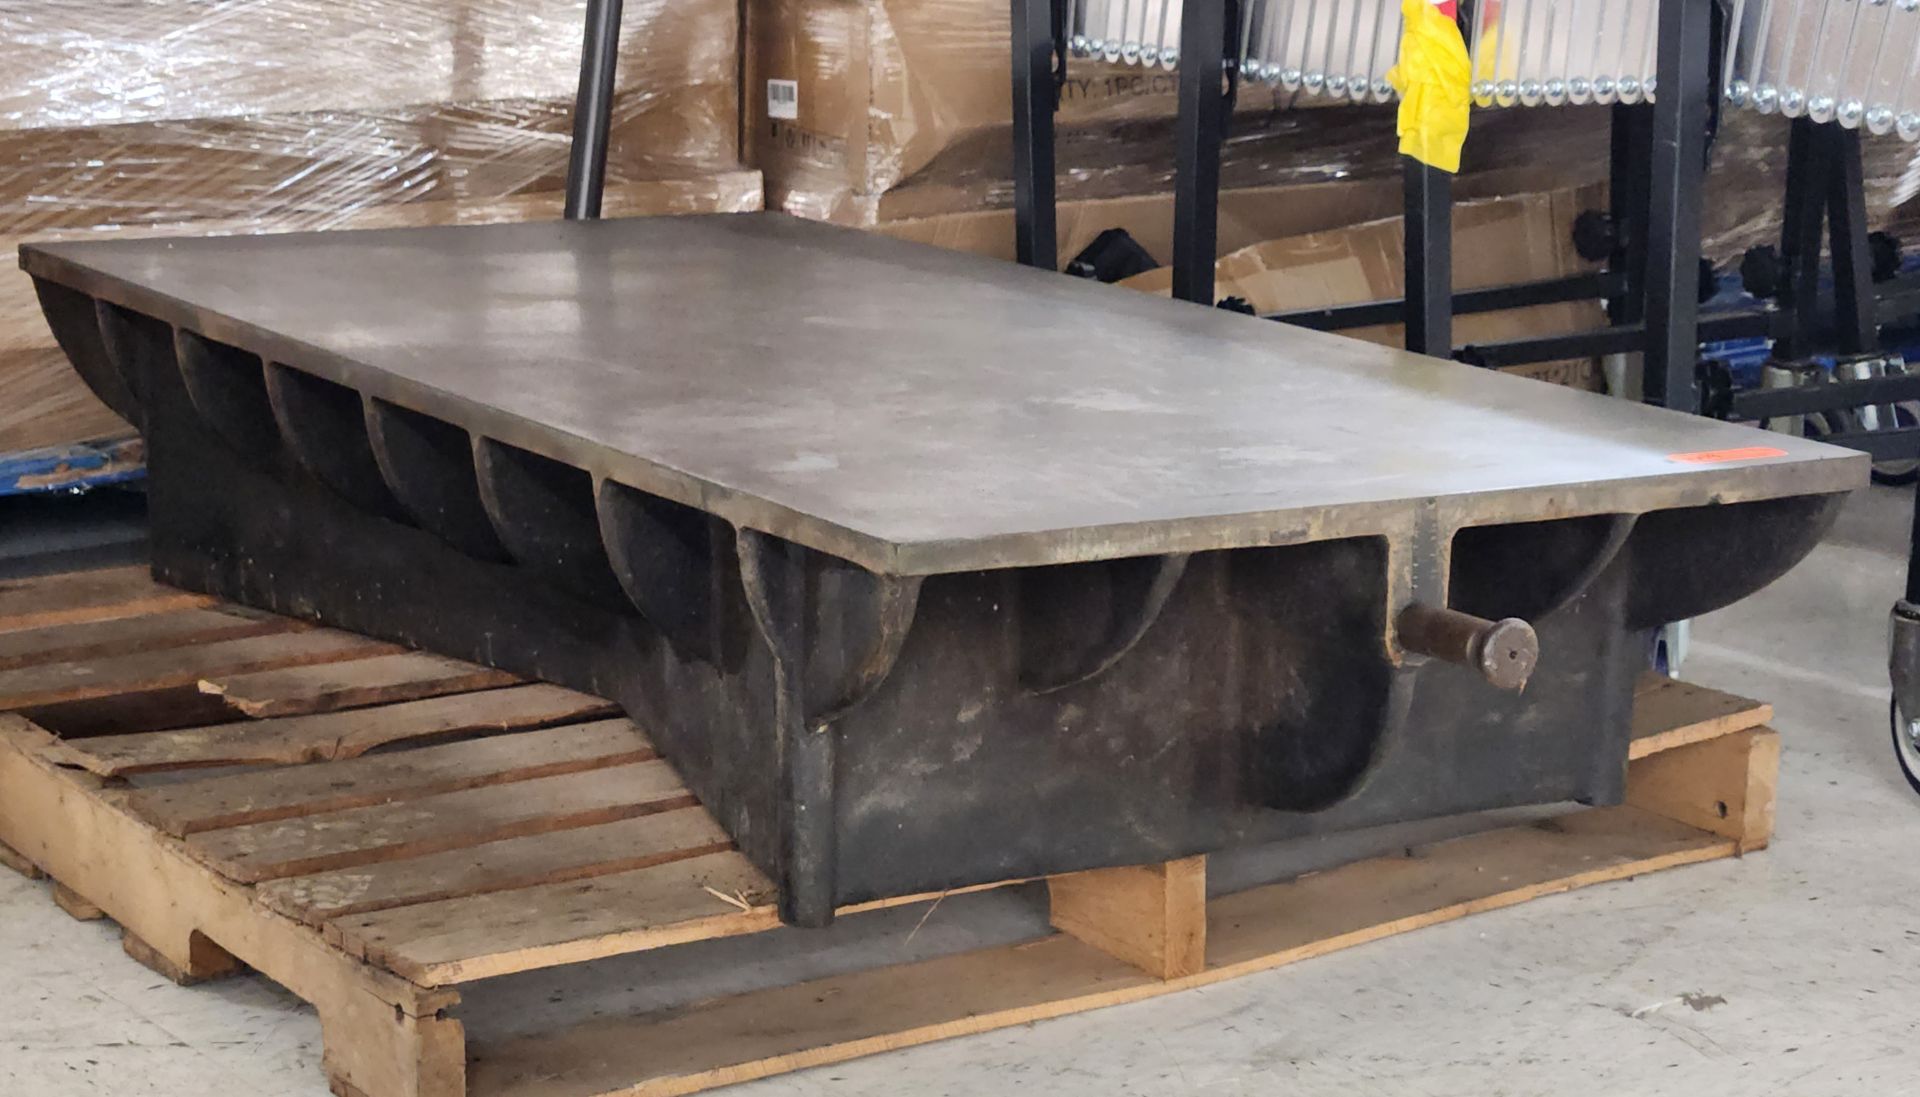 60" x 30" Surface Plate